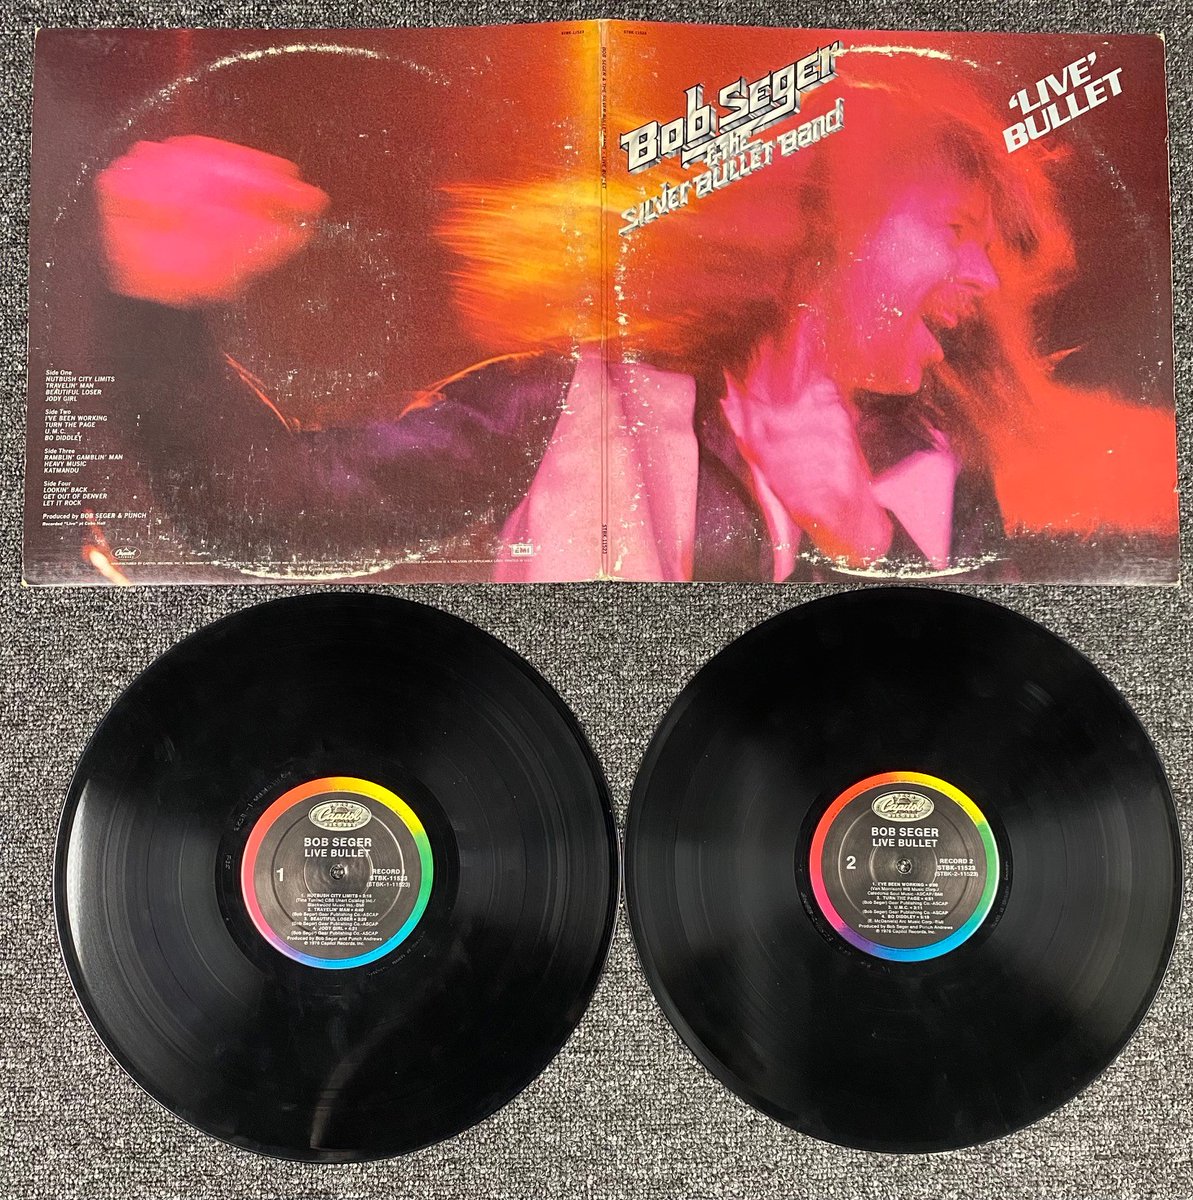 Today in 1976 @BobSeger releases the album #LiveBullet It takes him from being a regional artist to a national artist. What are your favorite live albums? - @JoeRockTX #Rock #ClassicRock #BobSeger #BobSegerAndTheSilverBulletBand #RockOnRock #TodayInRock #Vinyl #EagleSanAntonio